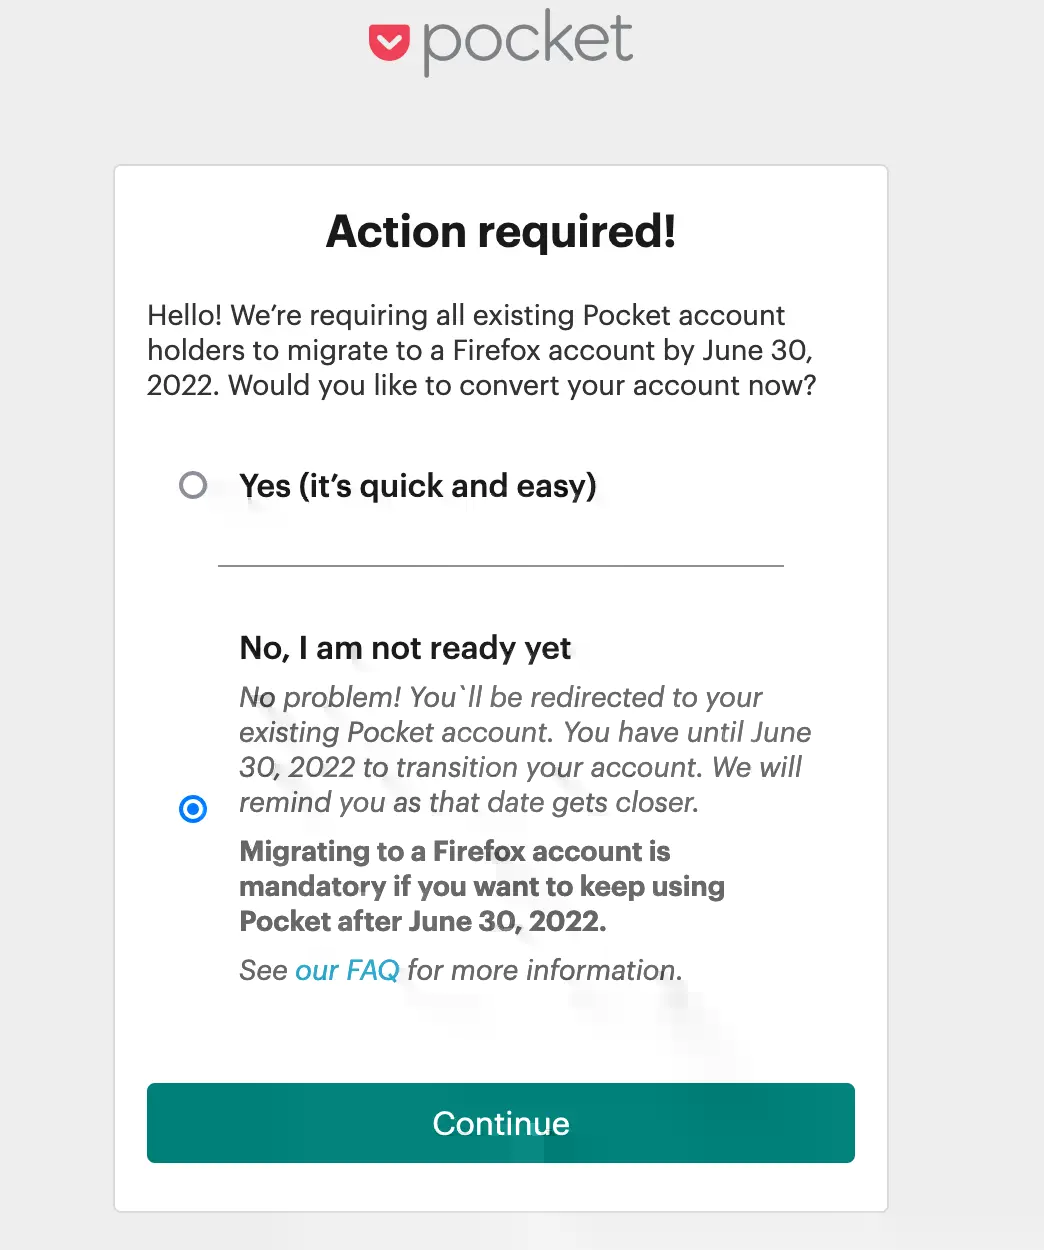 Screenshot of the dialogue on the Pocket website asking users to set up a Firefox account.